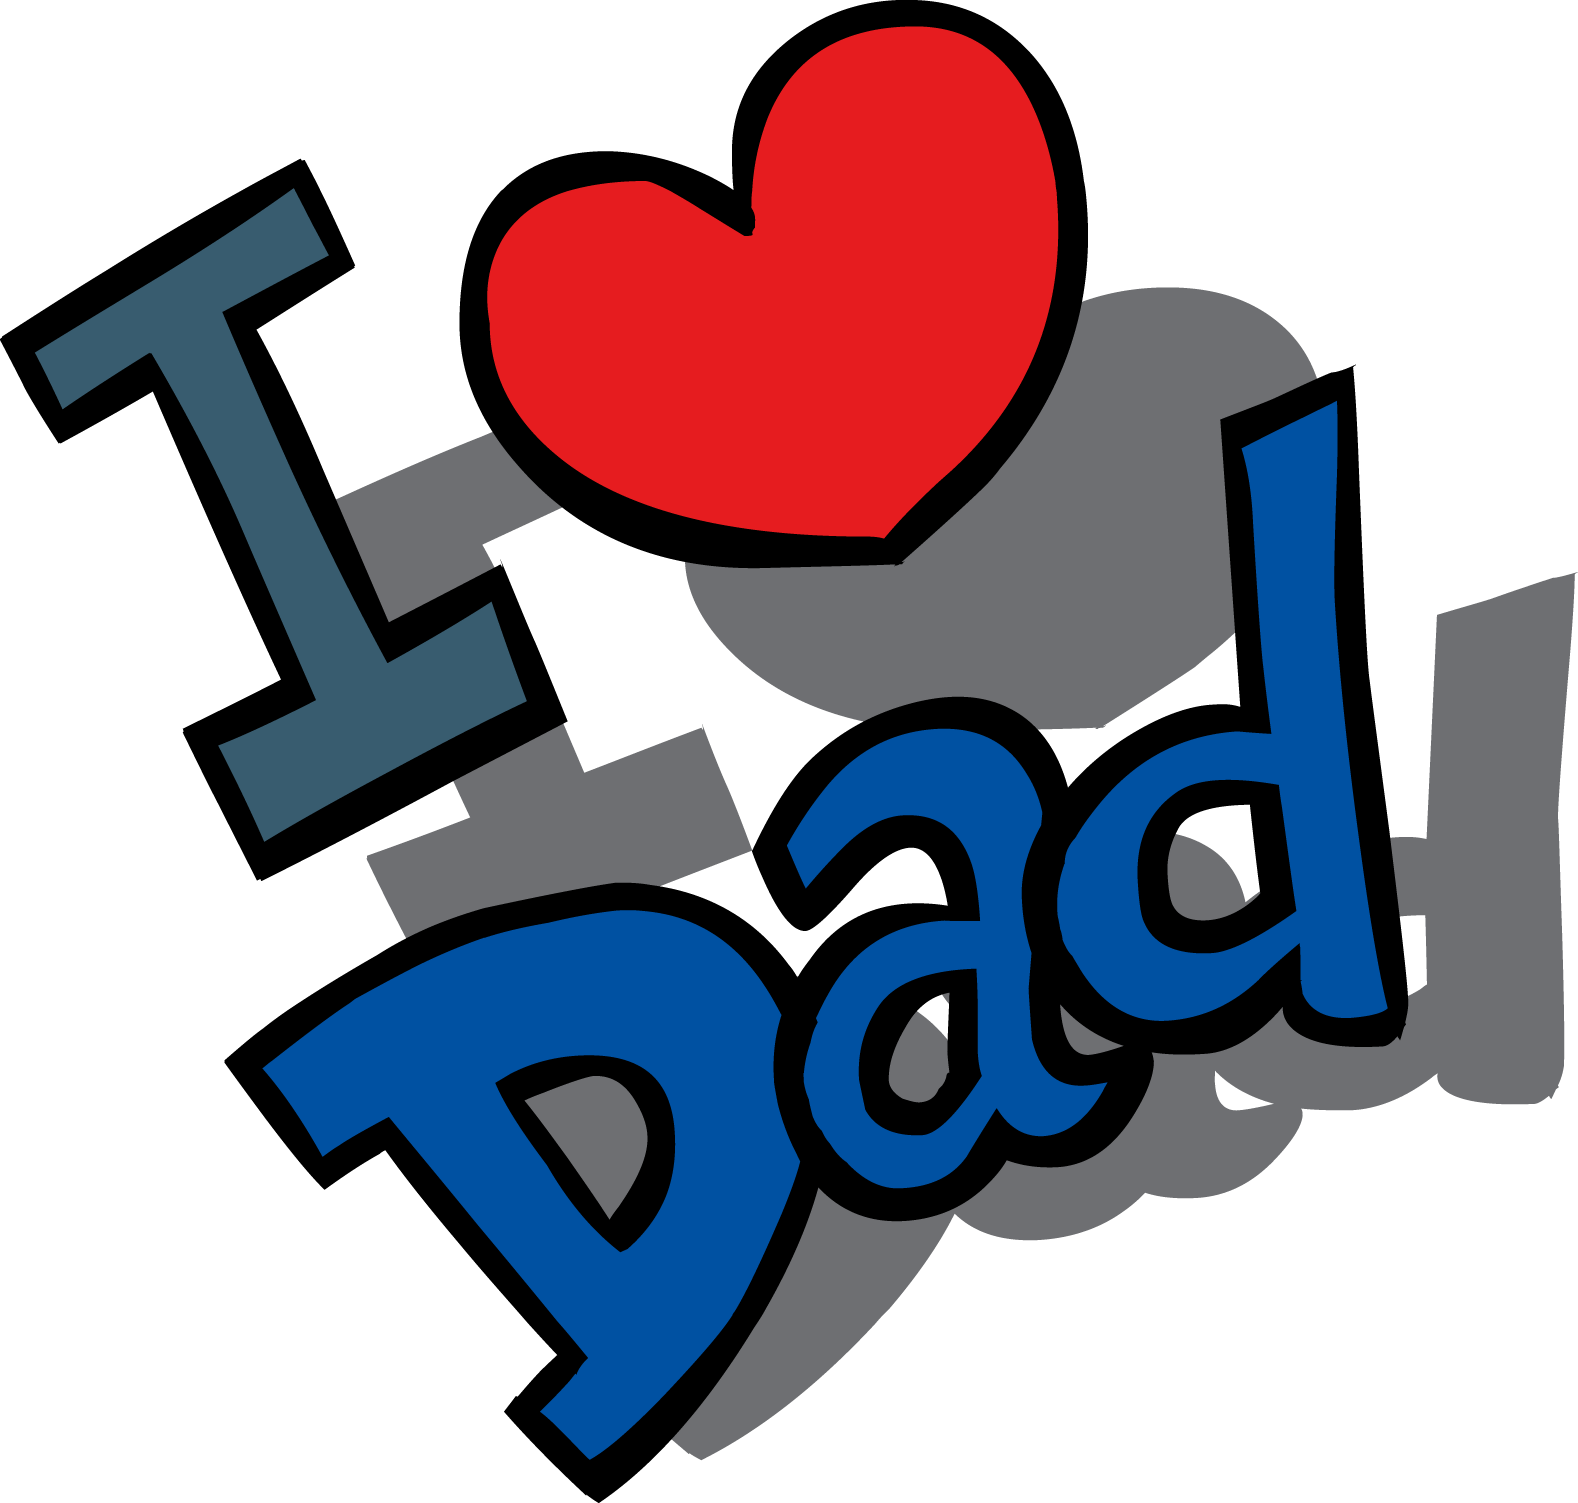 Fathers day free father'day clipart graphics - Cliparting.com